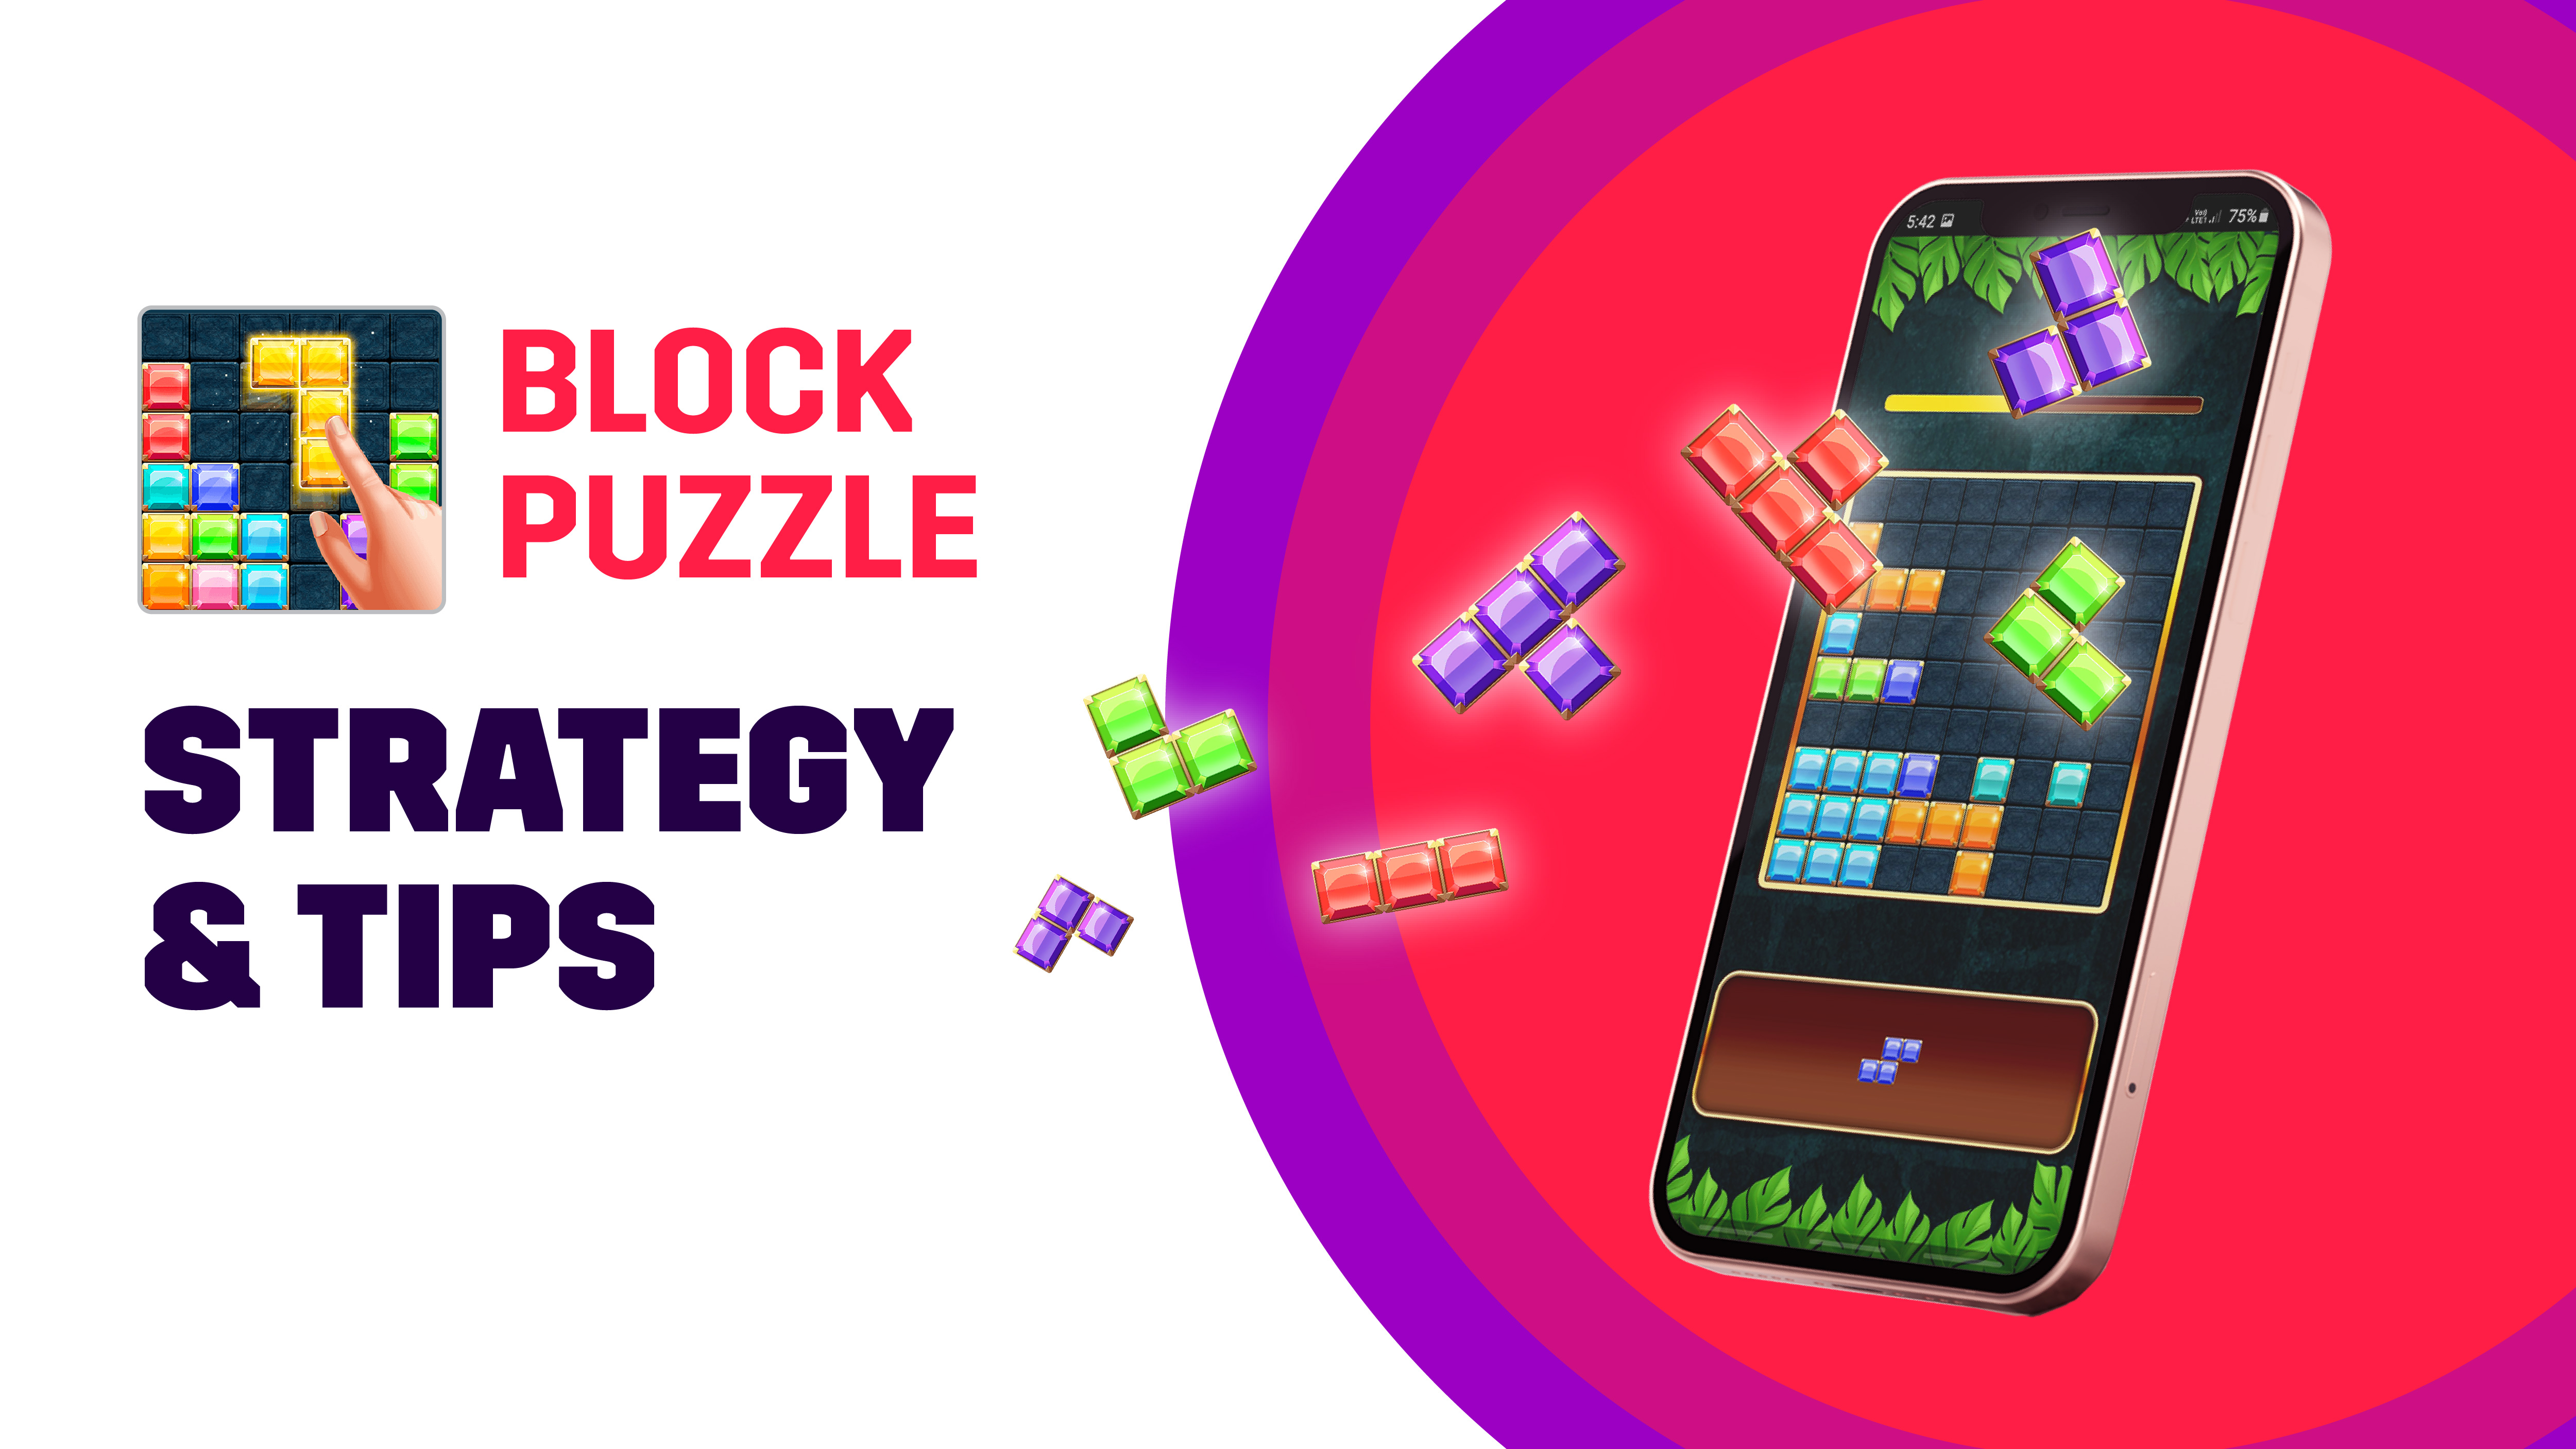 Block puzzle strategy to win